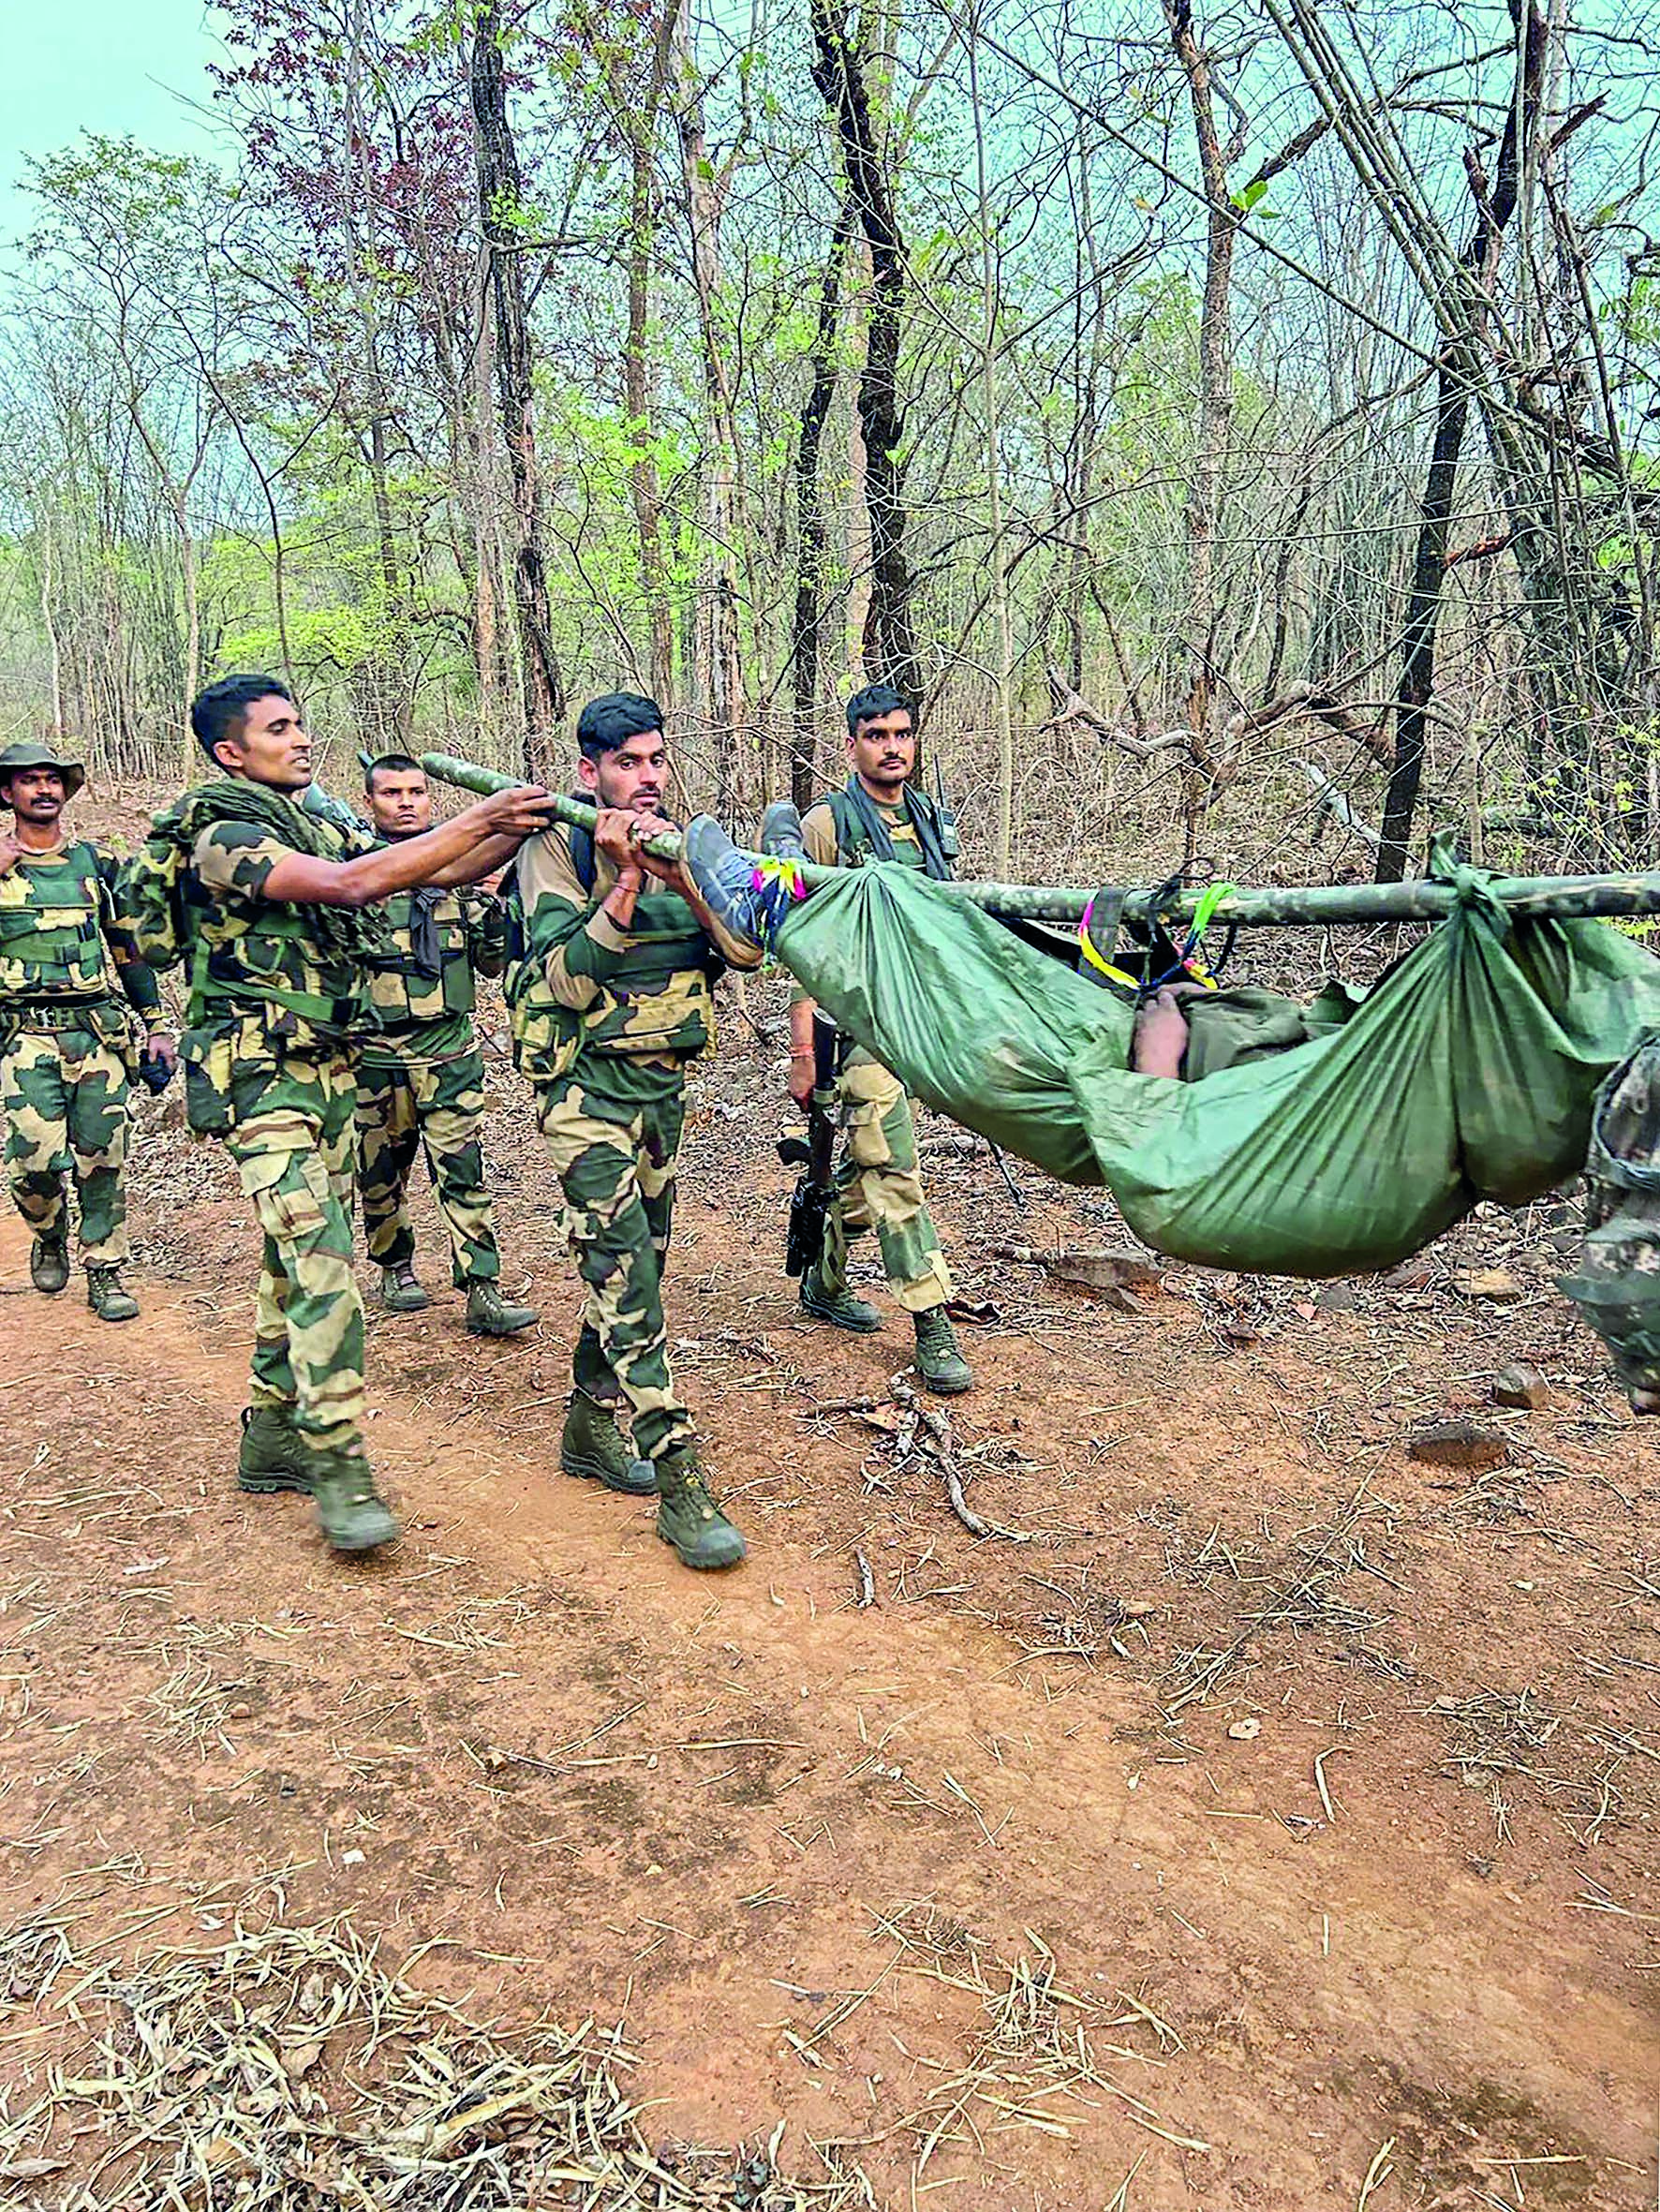 Silence in air, bullet marks on trees at encounter site where 29 Naxals were killed